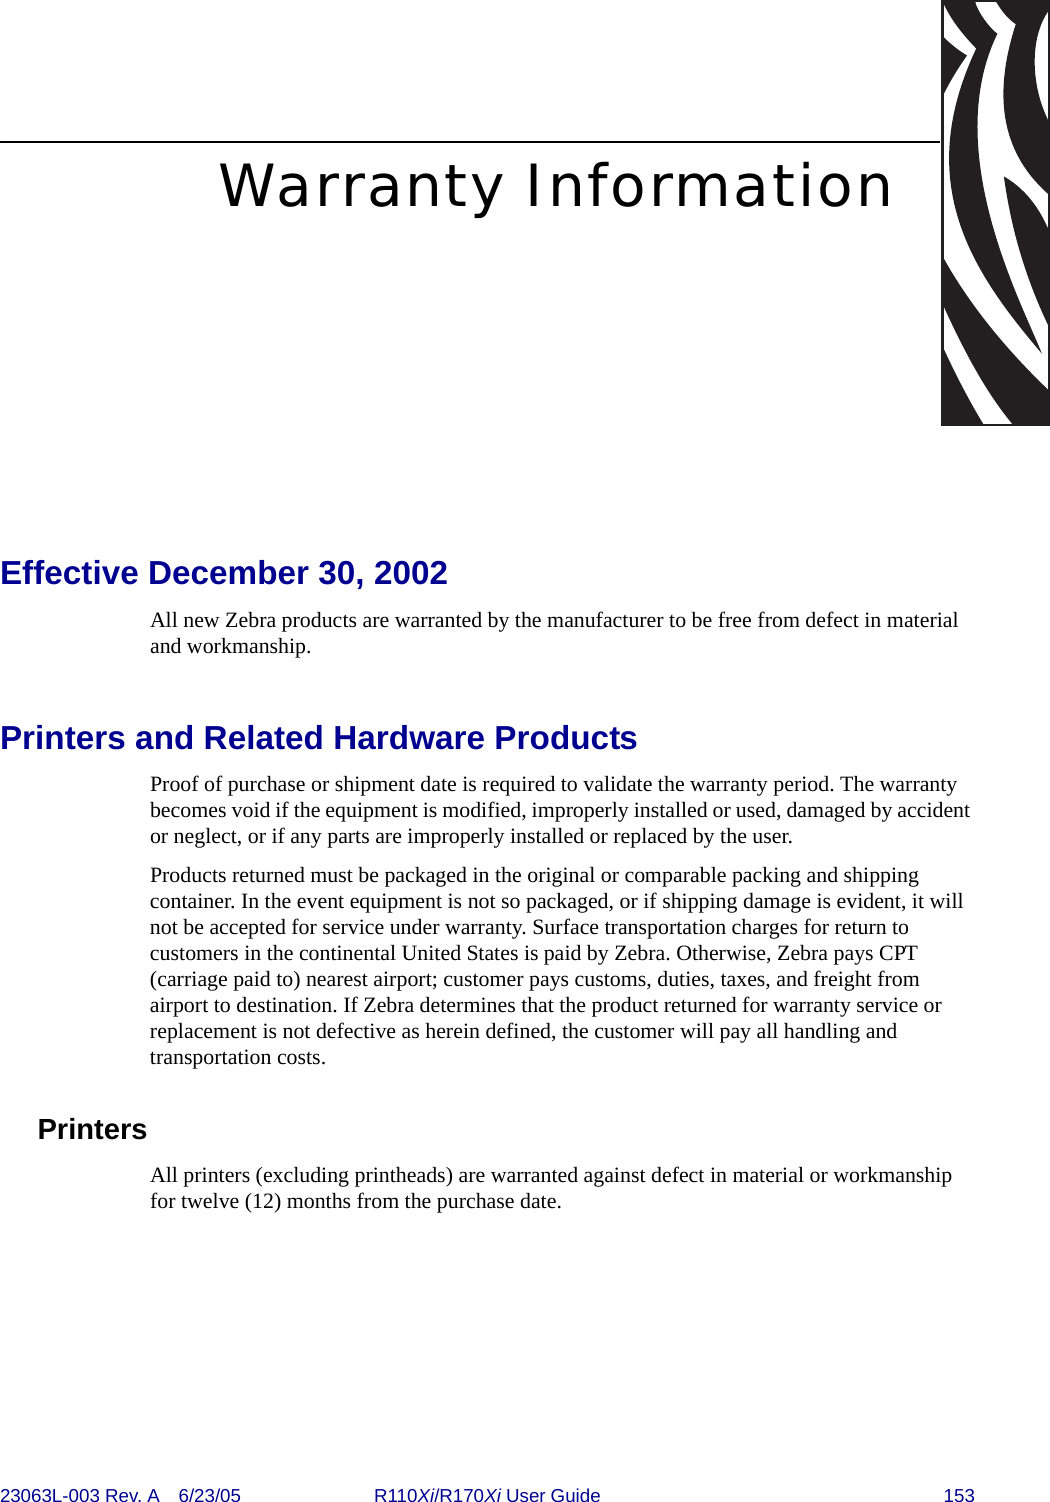 23063L-003 Rev. A 6/23/05 R110Xi/R170Xi User Guide 153Warranty InformationEffective December 30, 2002All new Zebra products are warranted by the manufacturer to be free from defect in material and workmanship. Printers and Related Hardware ProductsProof of purchase or shipment date is required to validate the warranty period. The warranty becomes void if the equipment is modified, improperly installed or used, damaged by accident or neglect, or if any parts are improperly installed or replaced by the user.Products returned must be packaged in the original or comparable packing and shipping container. In the event equipment is not so packaged, or if shipping damage is evident, it will not be accepted for service under warranty. Surface transportation charges for return to customers in the continental United States is paid by Zebra. Otherwise, Zebra pays CPT (carriage paid to) nearest airport; customer pays customs, duties, taxes, and freight from airport to destination. If Zebra determines that the product returned for warranty service or replacement is not defective as herein defined, the customer will pay all handling and transportation costs.PrintersAll printers (excluding printheads) are warranted against defect in material or workmanship for twelve (12) months from the purchase date.